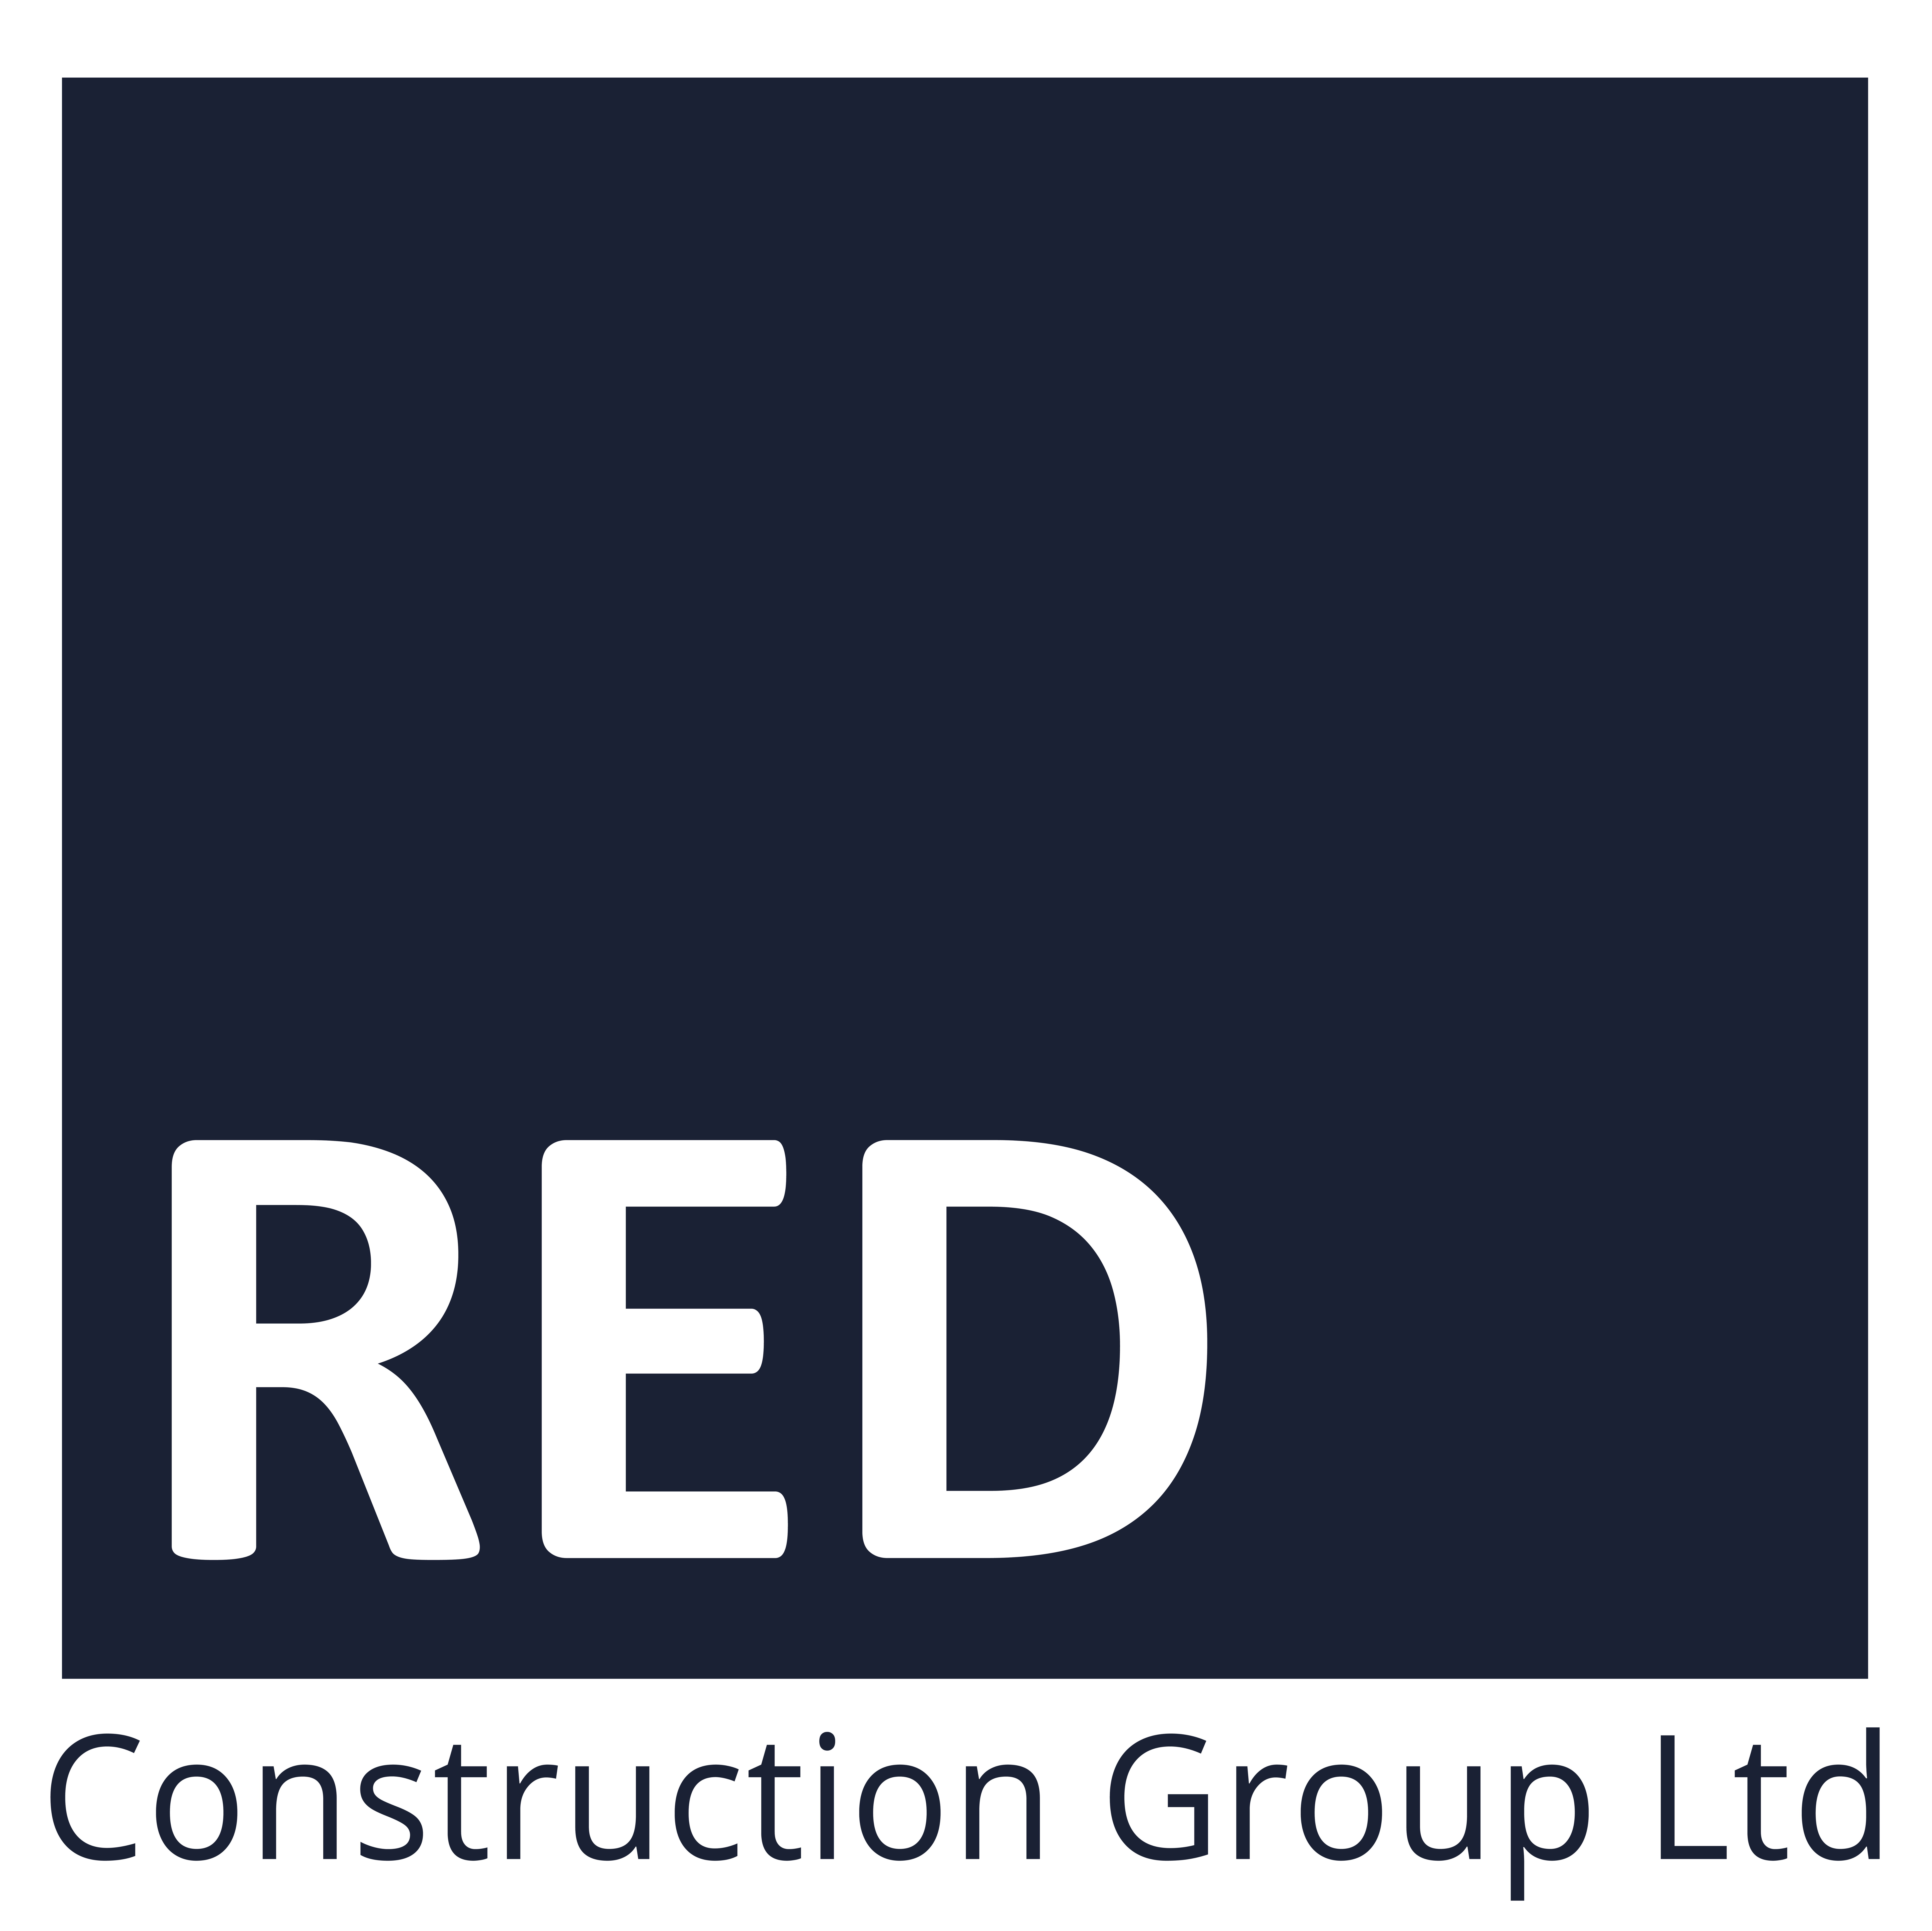 RED Construction - Site Inspection Rev 2